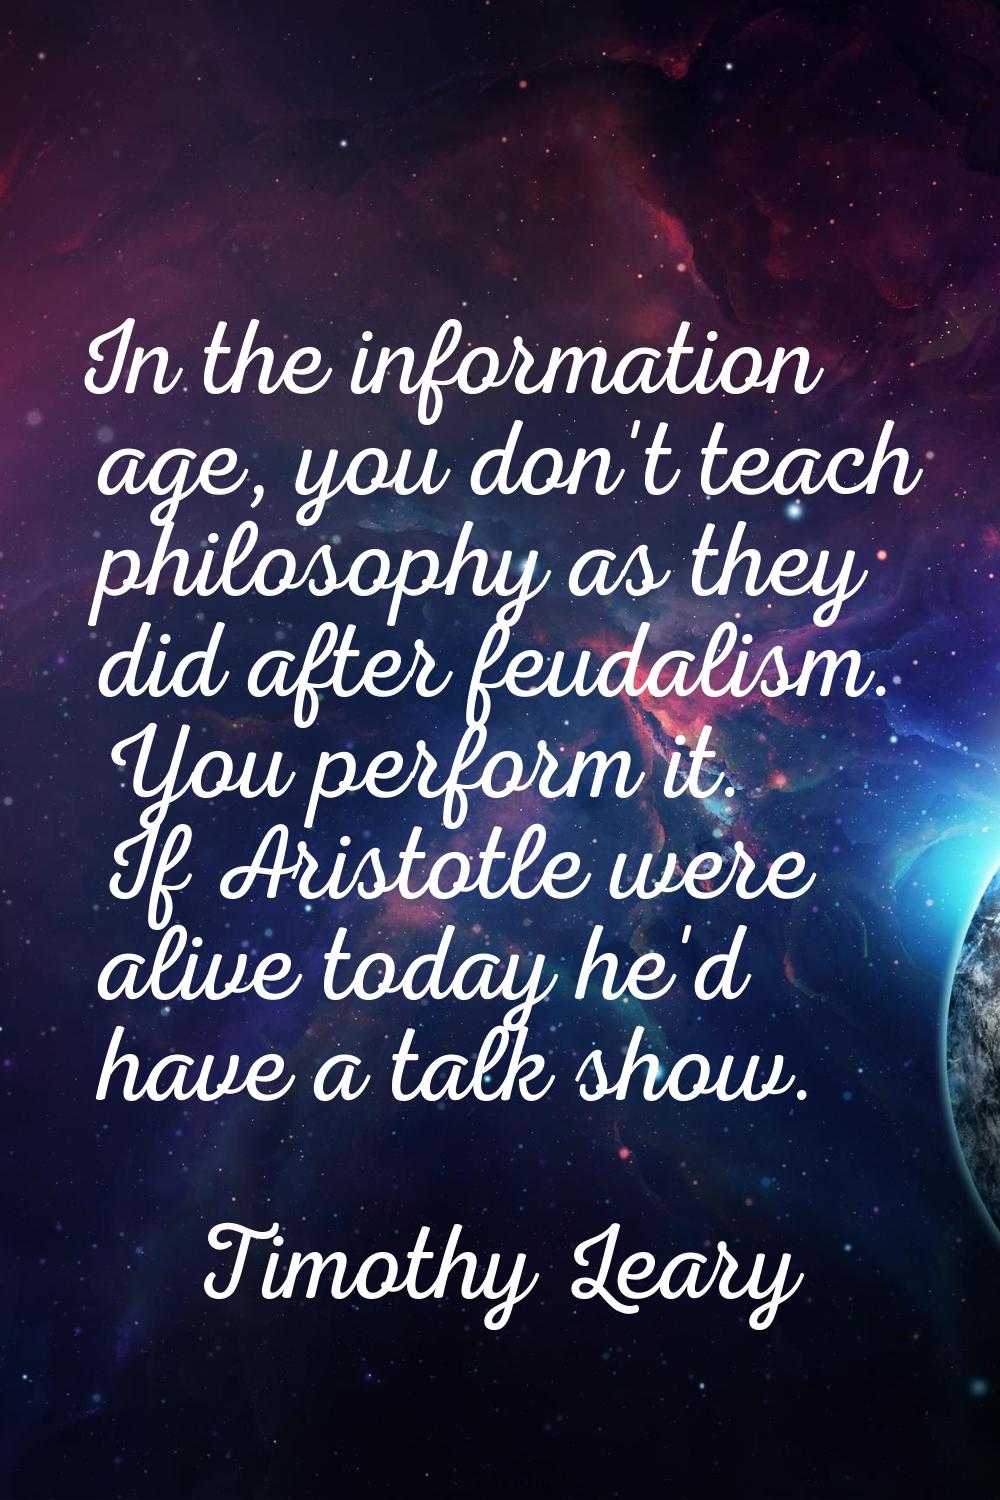 In the information age, you don't teach philosophy as they did after feudalism. You perform it. If 